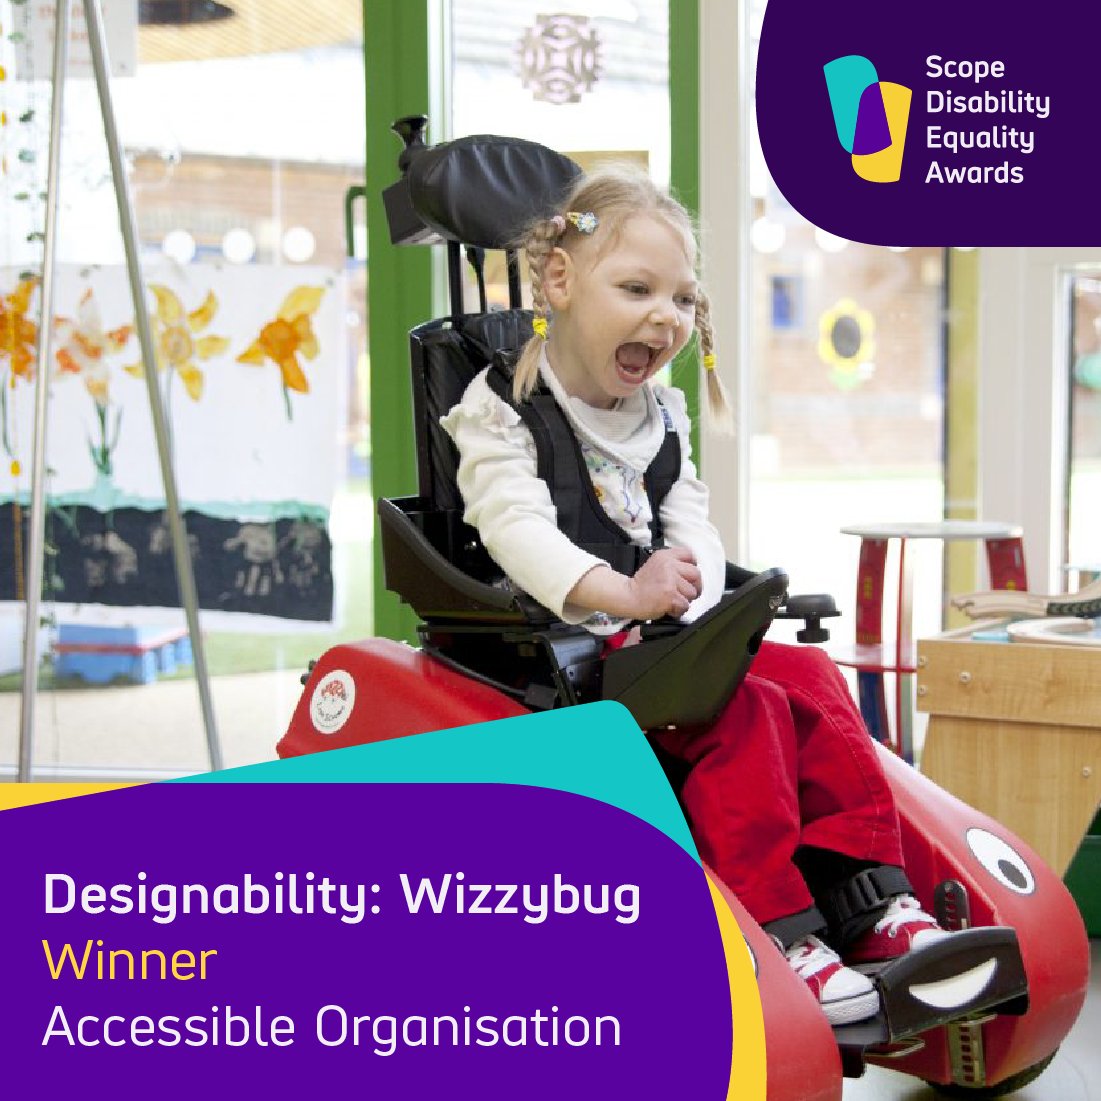 🏆 Our Accessible Organisation Award goes to Designability, makers of the Wizzybug powered wheelchair. The Wizzybug gives more independence to pre-school-aged children, enabling disabled children to thrive alongside their peers. Congratulations, @DesignabilityUK!